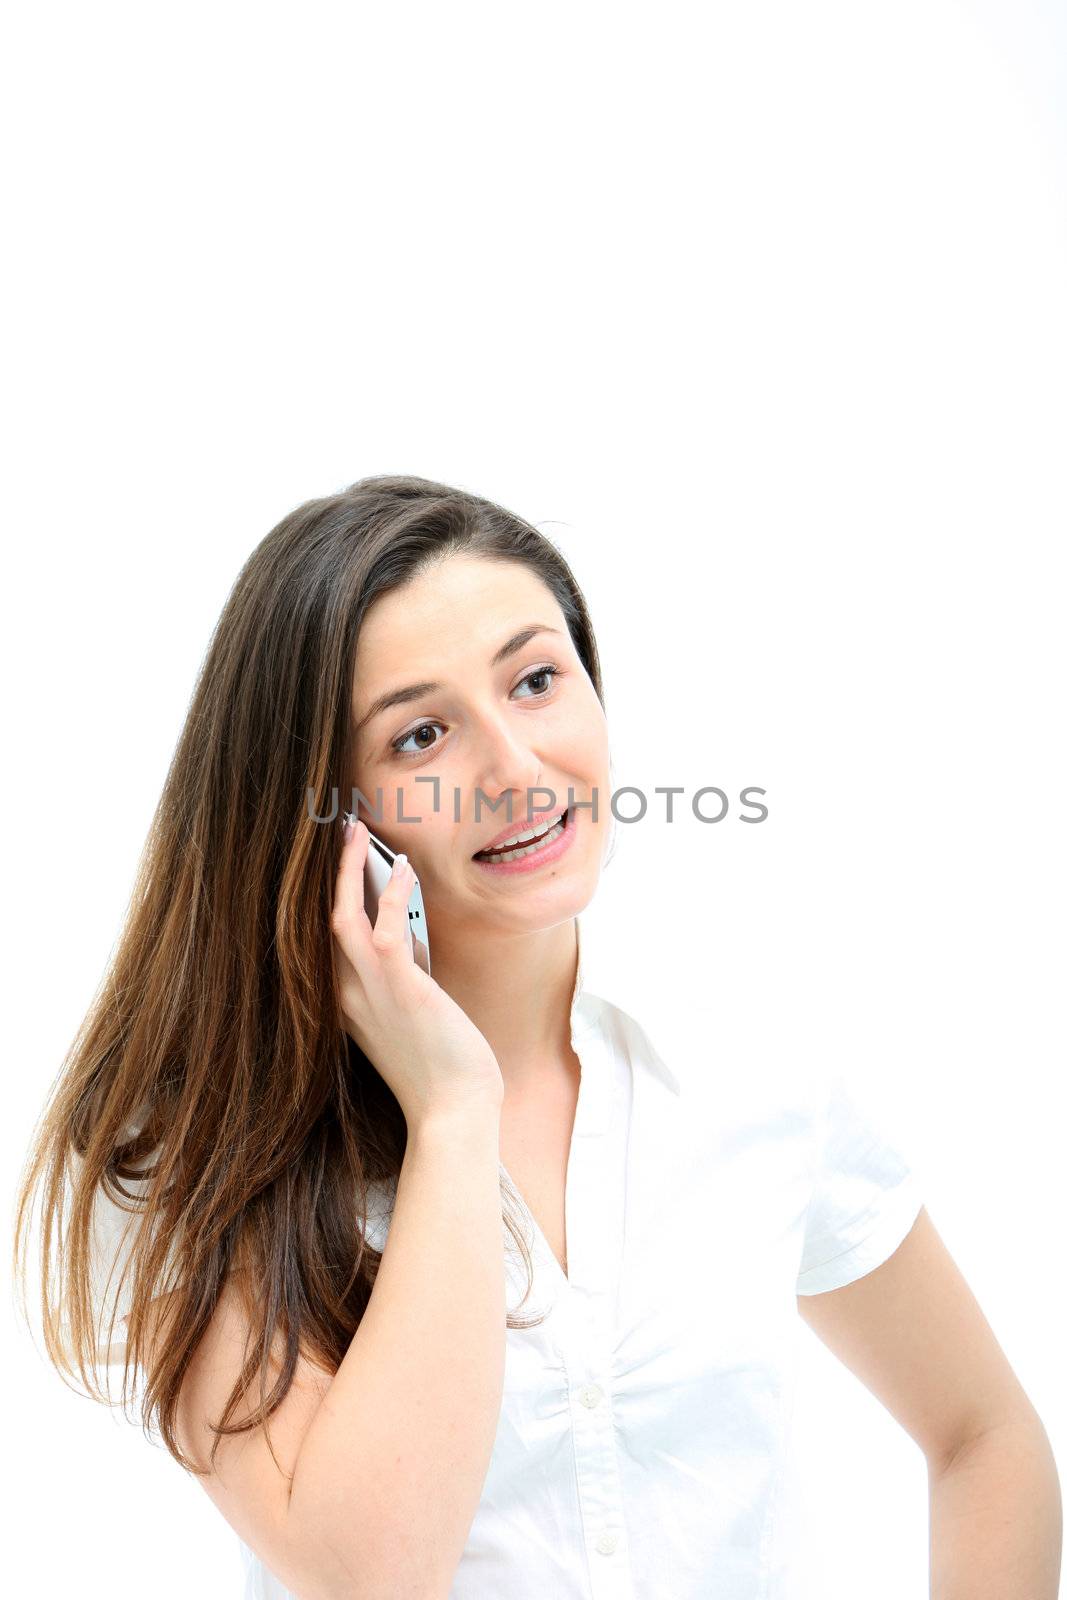 Attractive young woman with natural expression and posture talking animatedly on her mobile phone